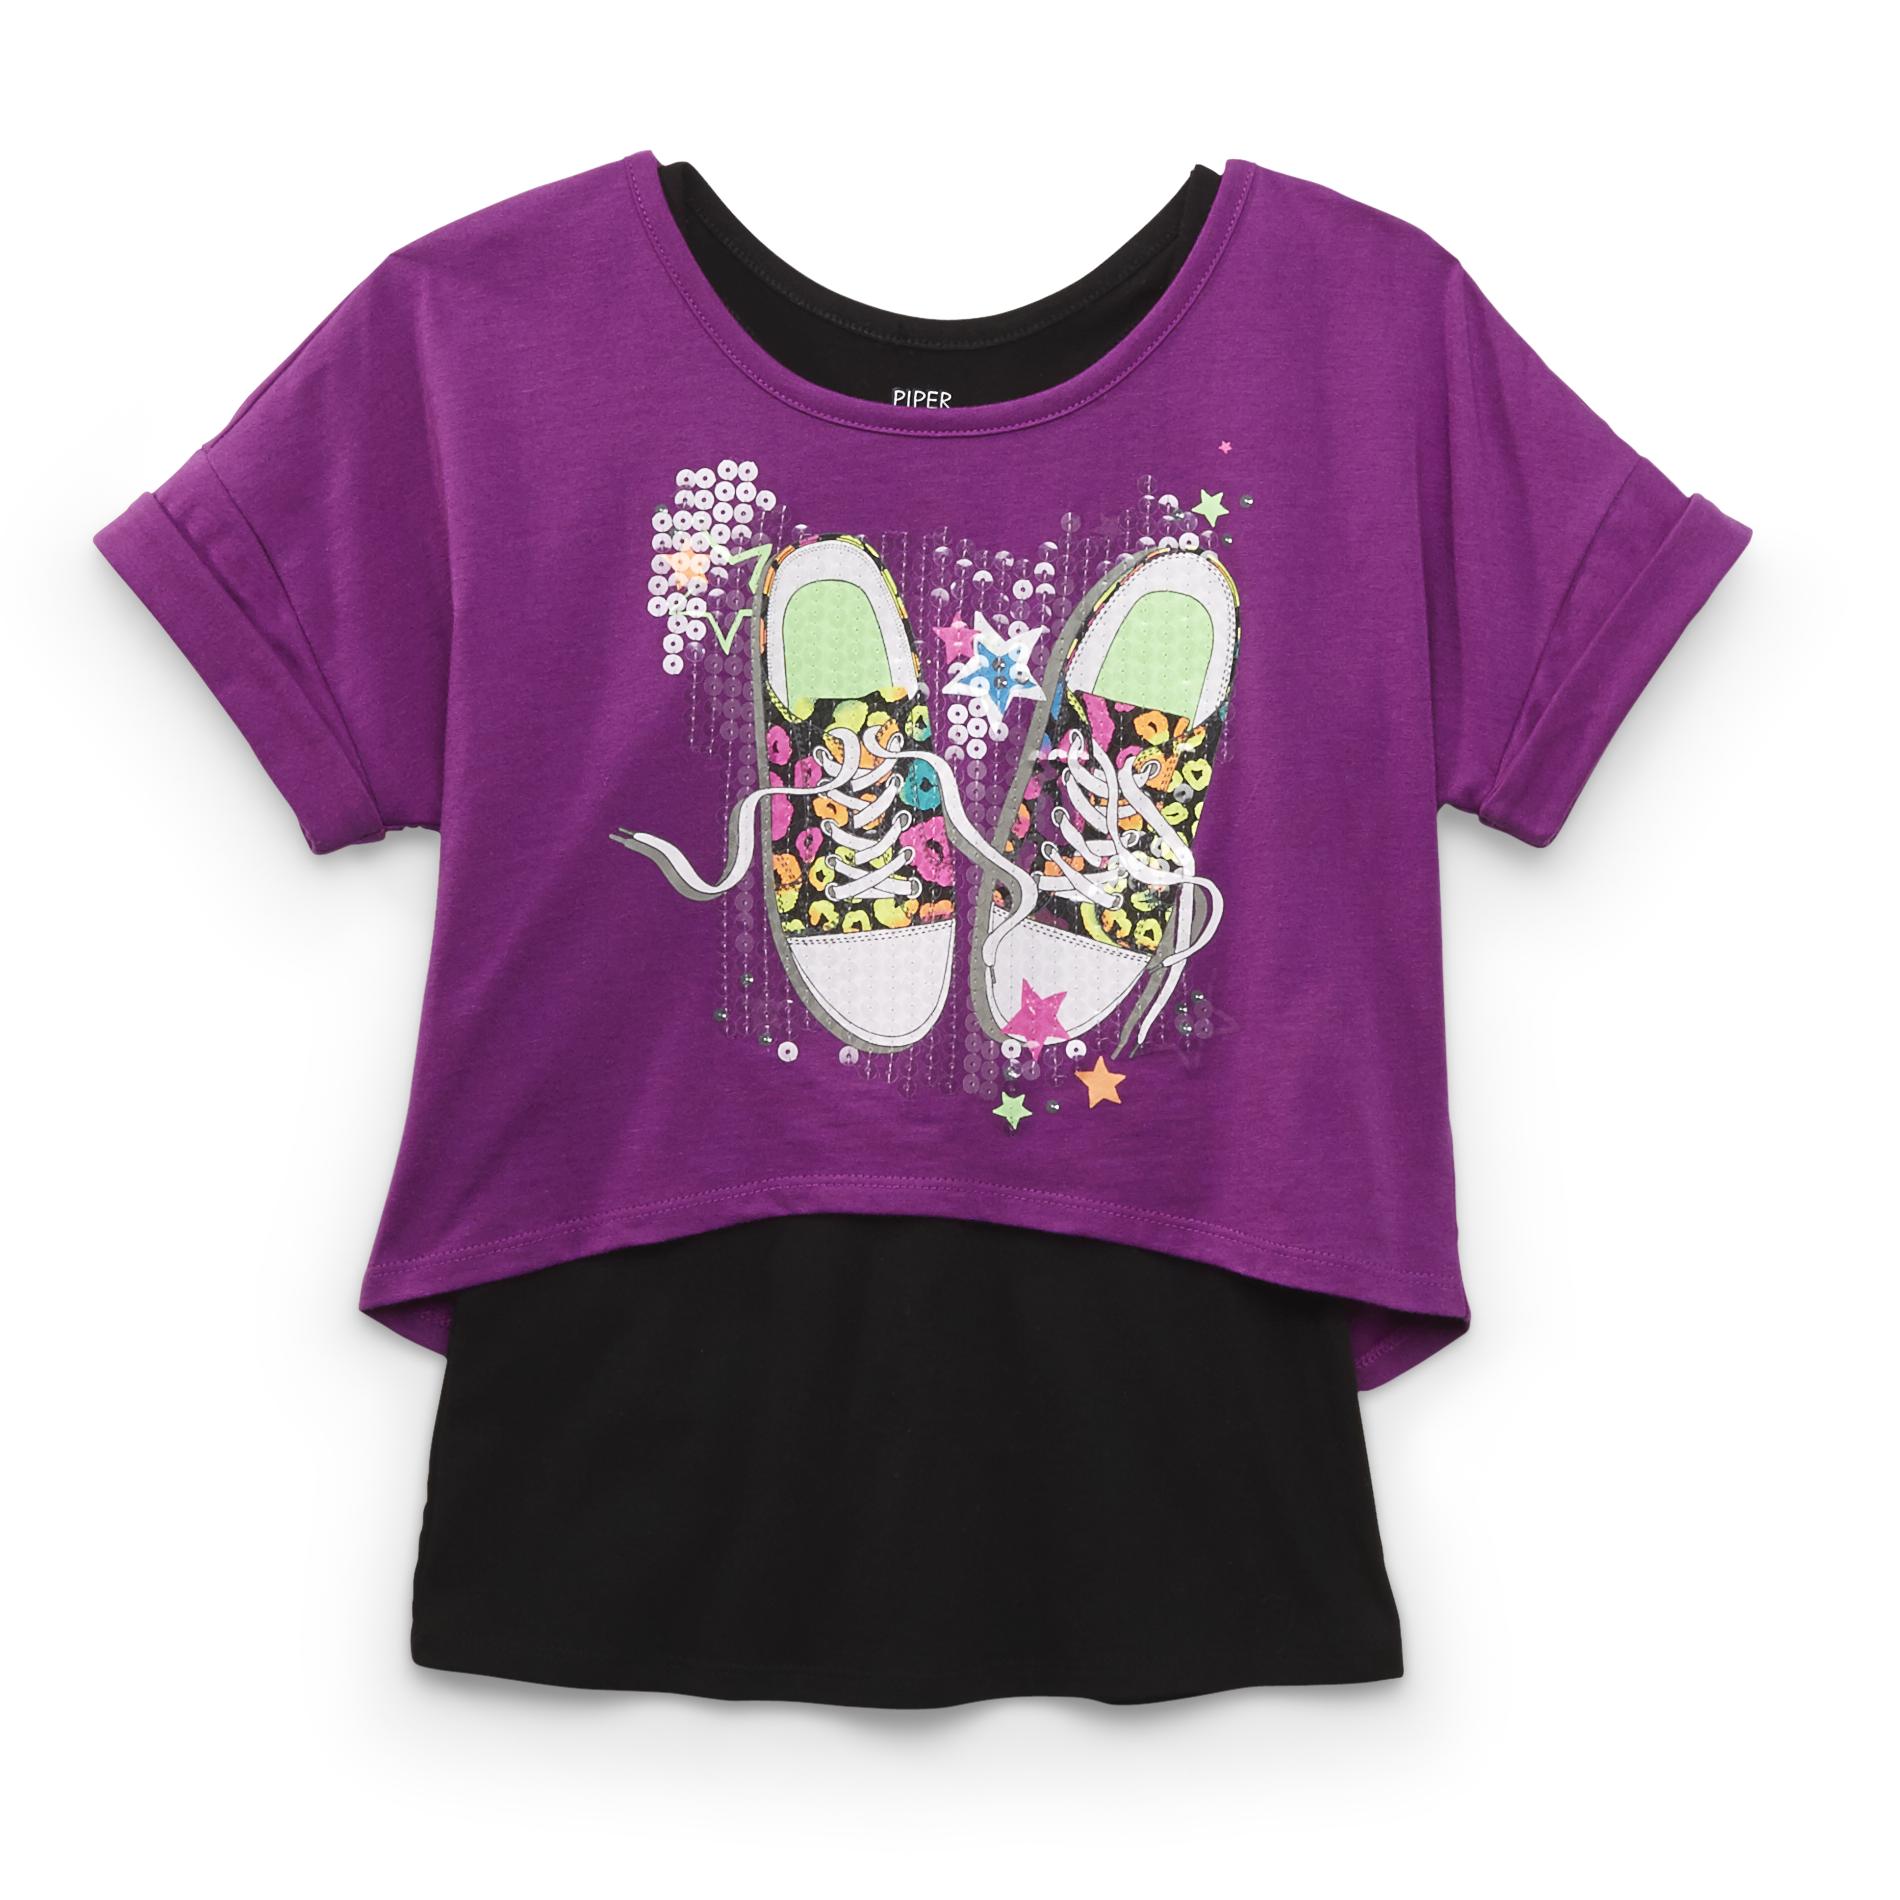 Piper Active Girl's Tank Top & T-Shirt - Shoes